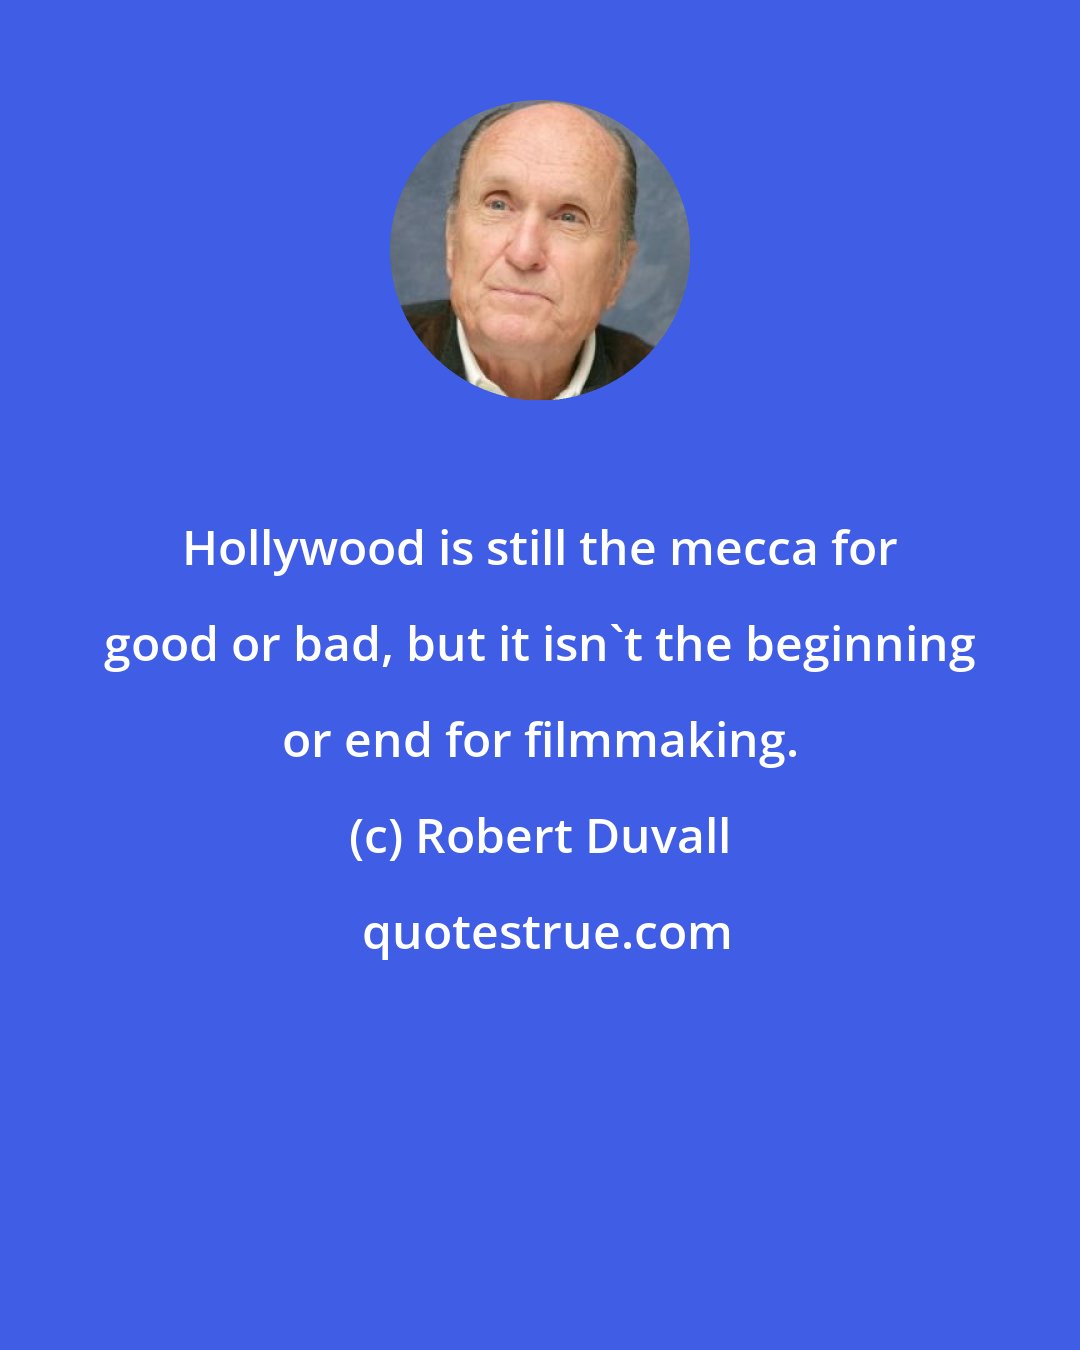 Robert Duvall: Hollywood is still the mecca for good or bad, but it isn't the beginning or end for filmmaking.